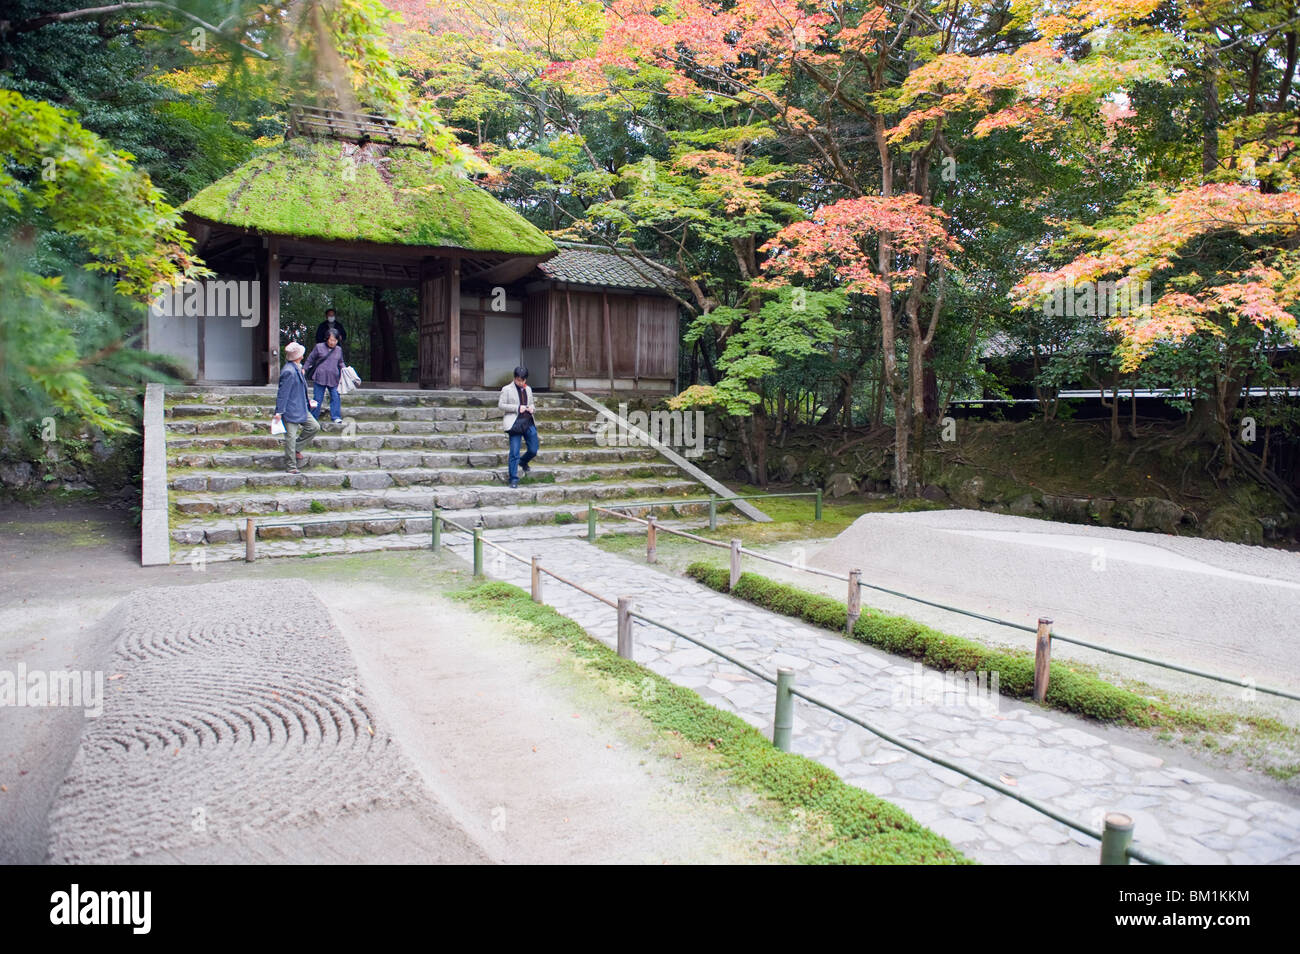 Sand garden, autumn colours and moss covered entrance with visiting tourists, Honen in temple dating from 1680, Kyoto, Japan Stock Photo